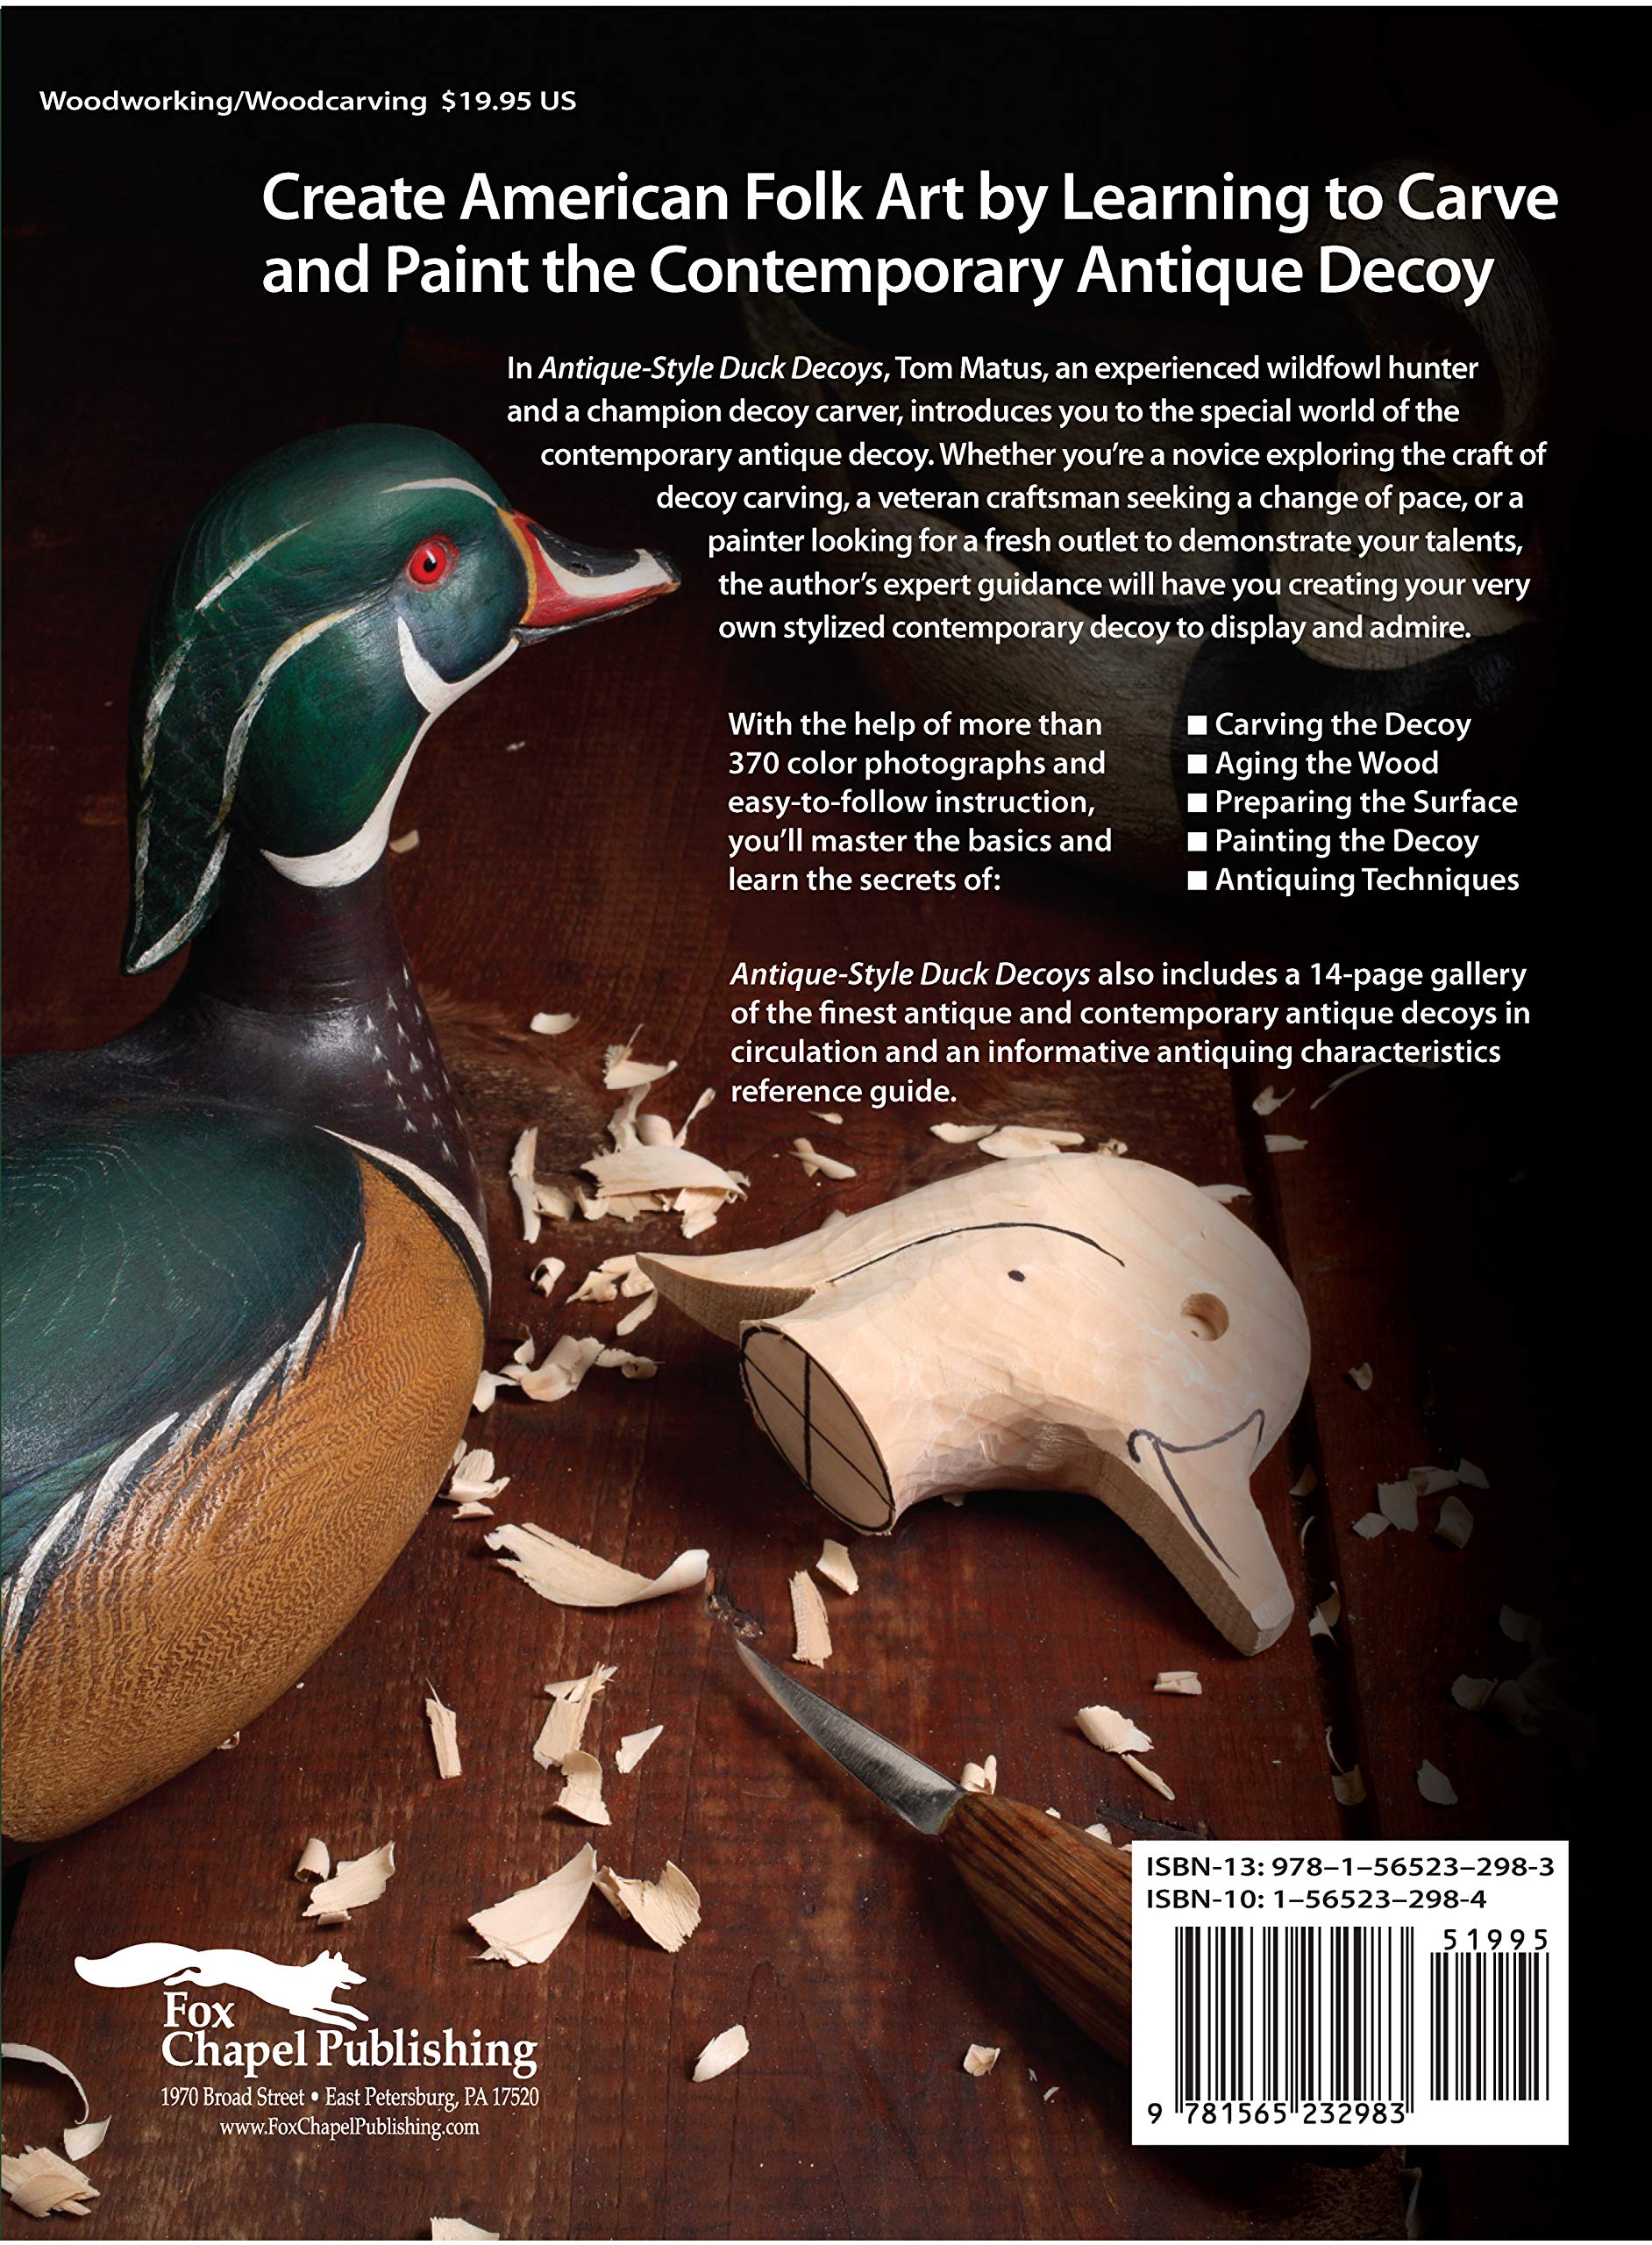 Antique-Style Duck Decoys: Contemporary Techniques to Carve and Paint in the Folk Art Tradition